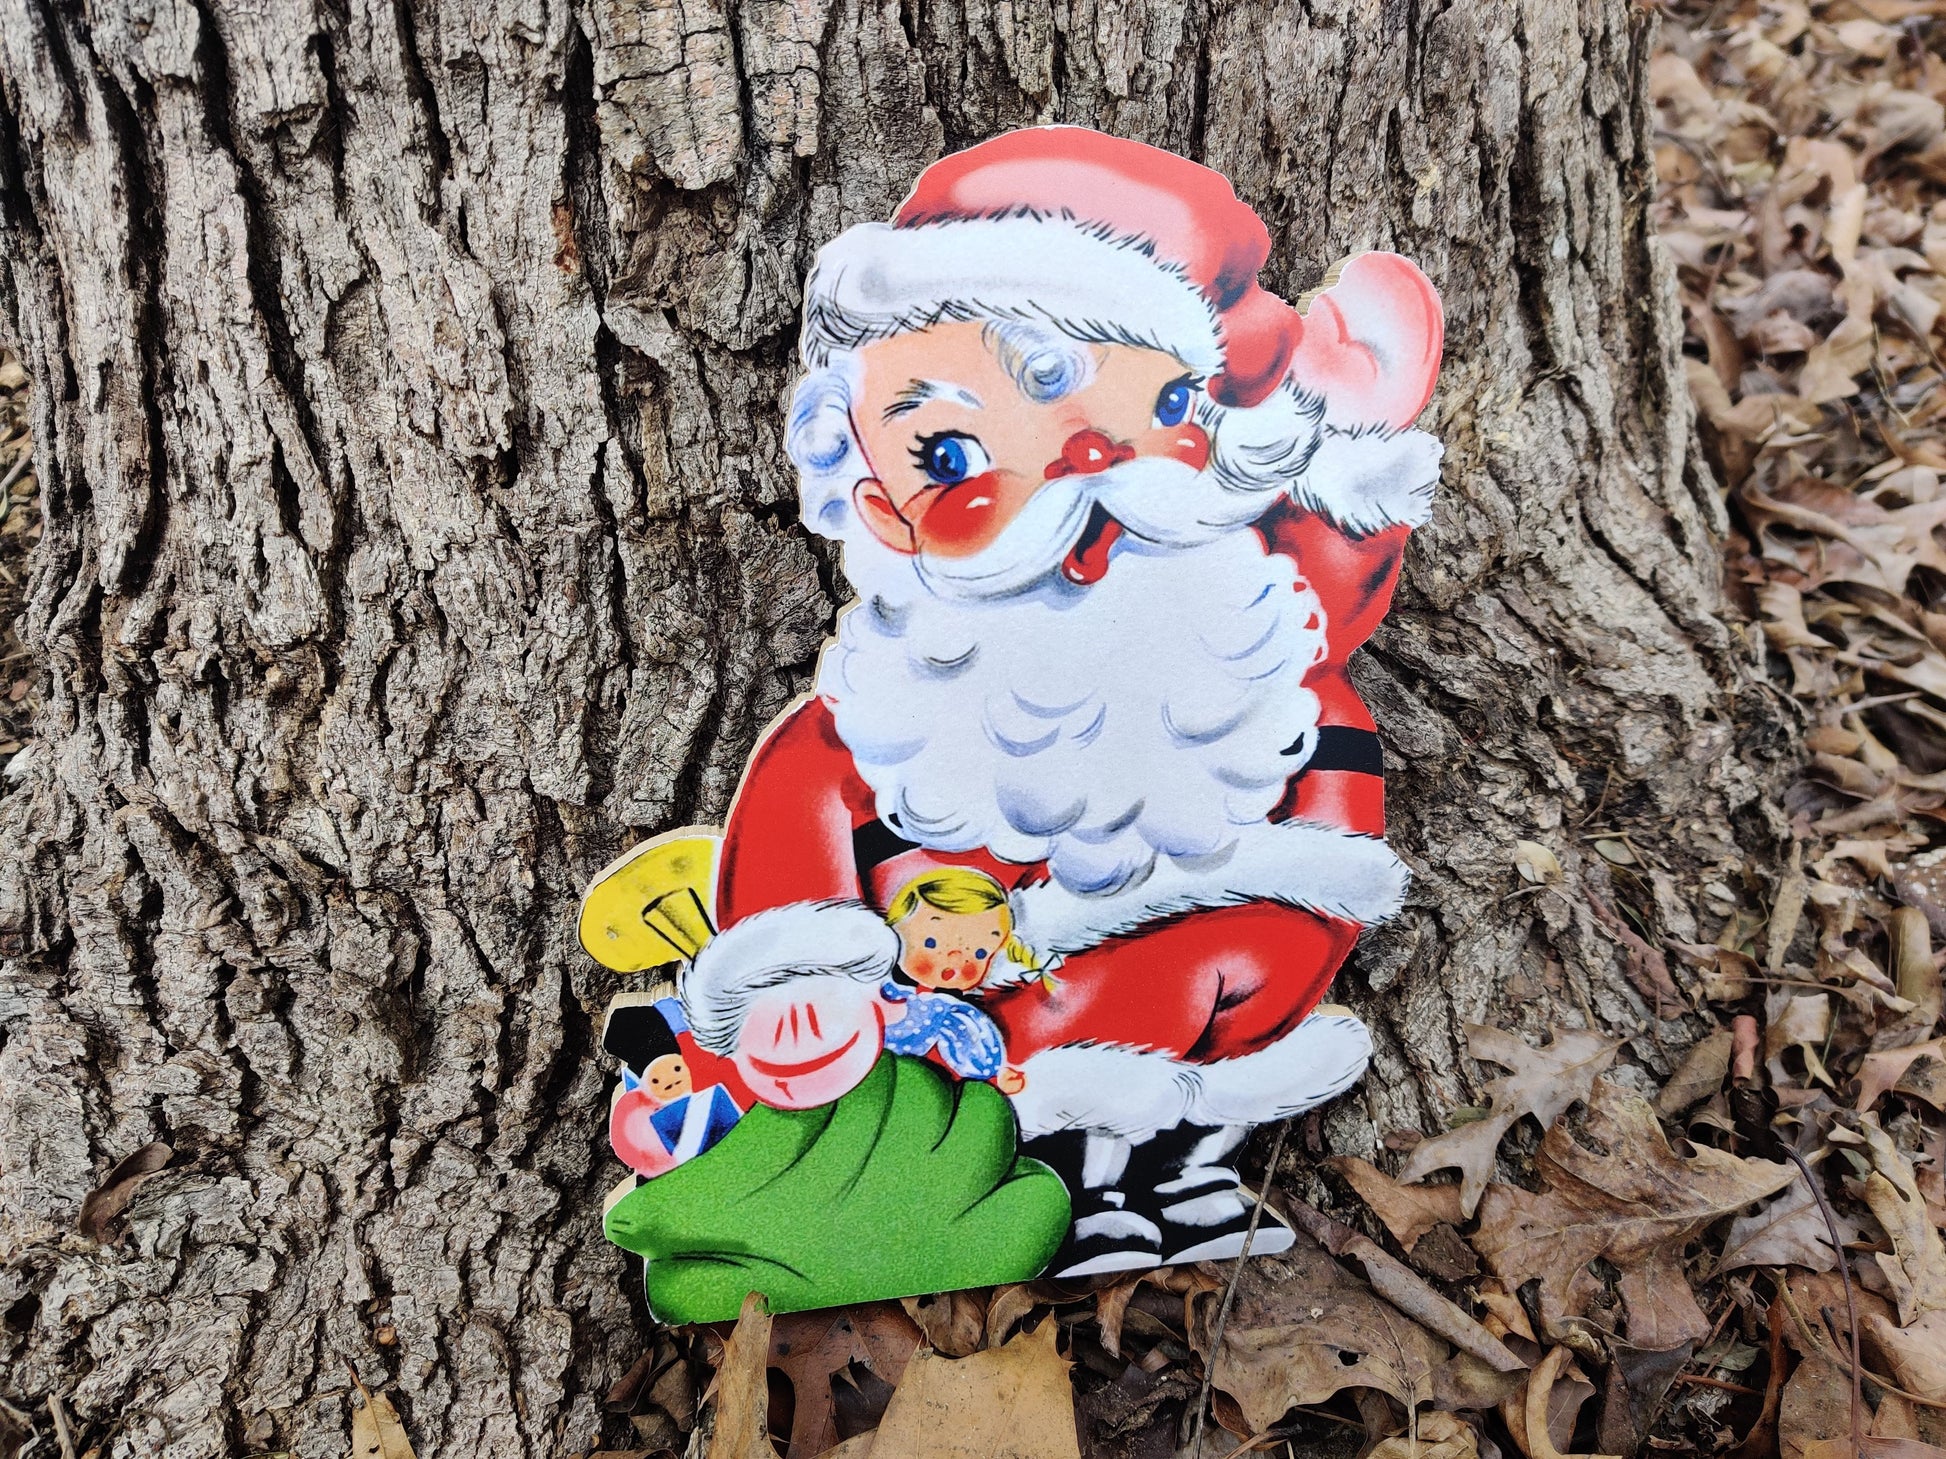 Santa Claus with Toy Sack Wood Cutout-The Sawmill Shop